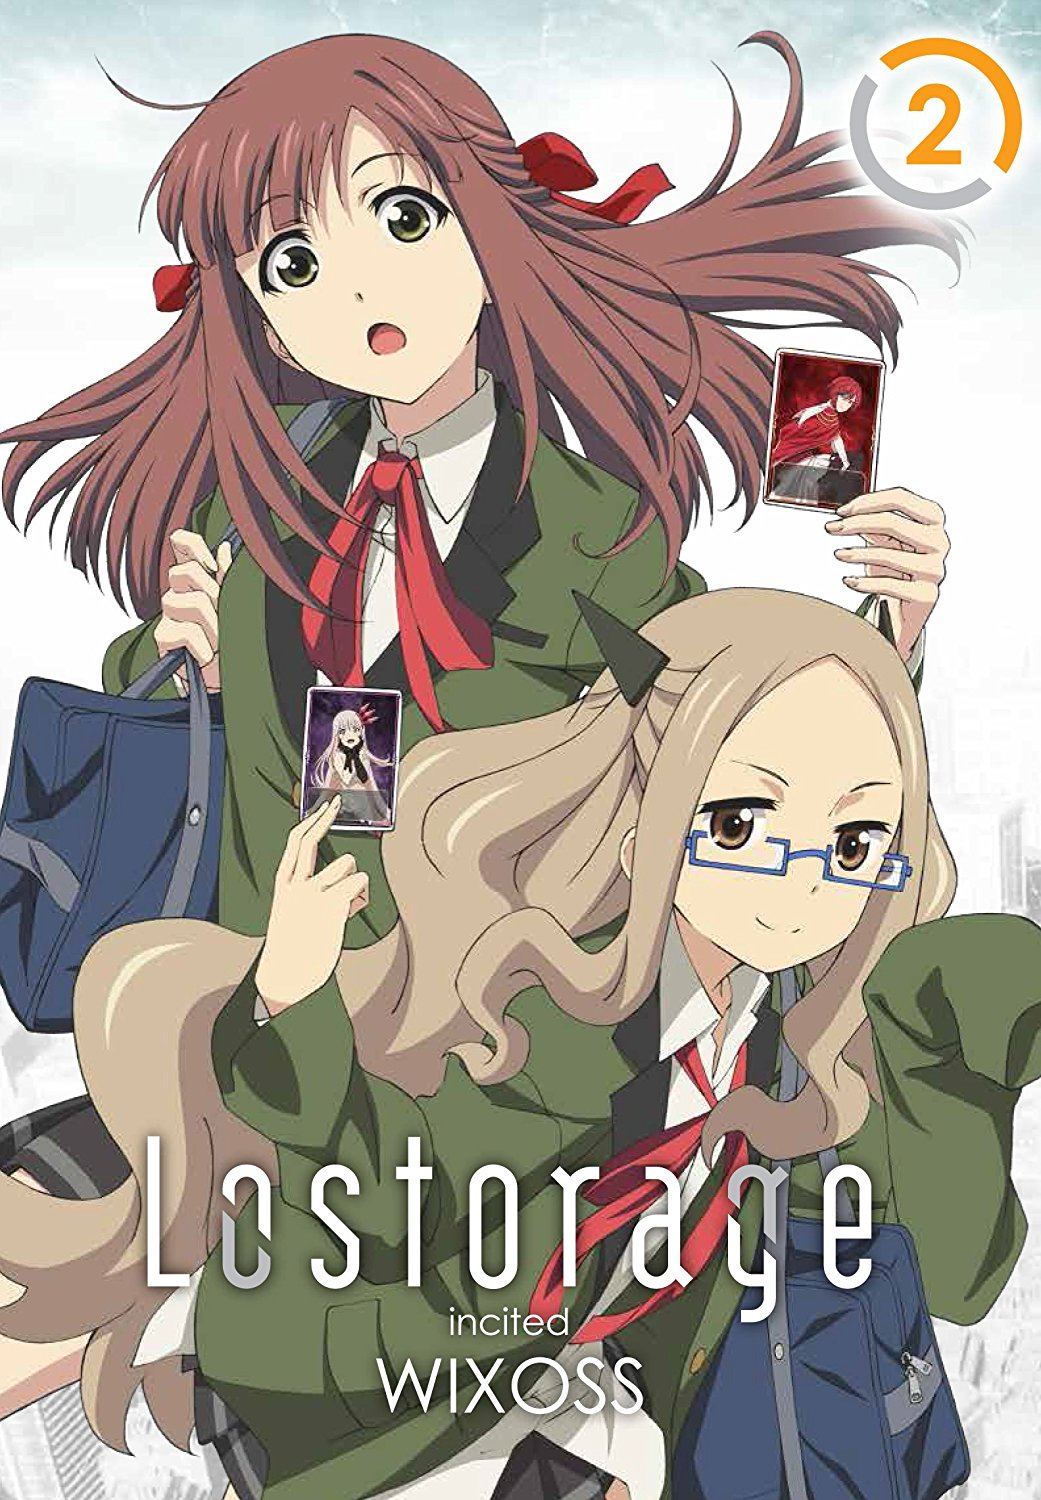 Some Thoughts On: Lostorage Incited WIXOSS (2016) Series | Personafication